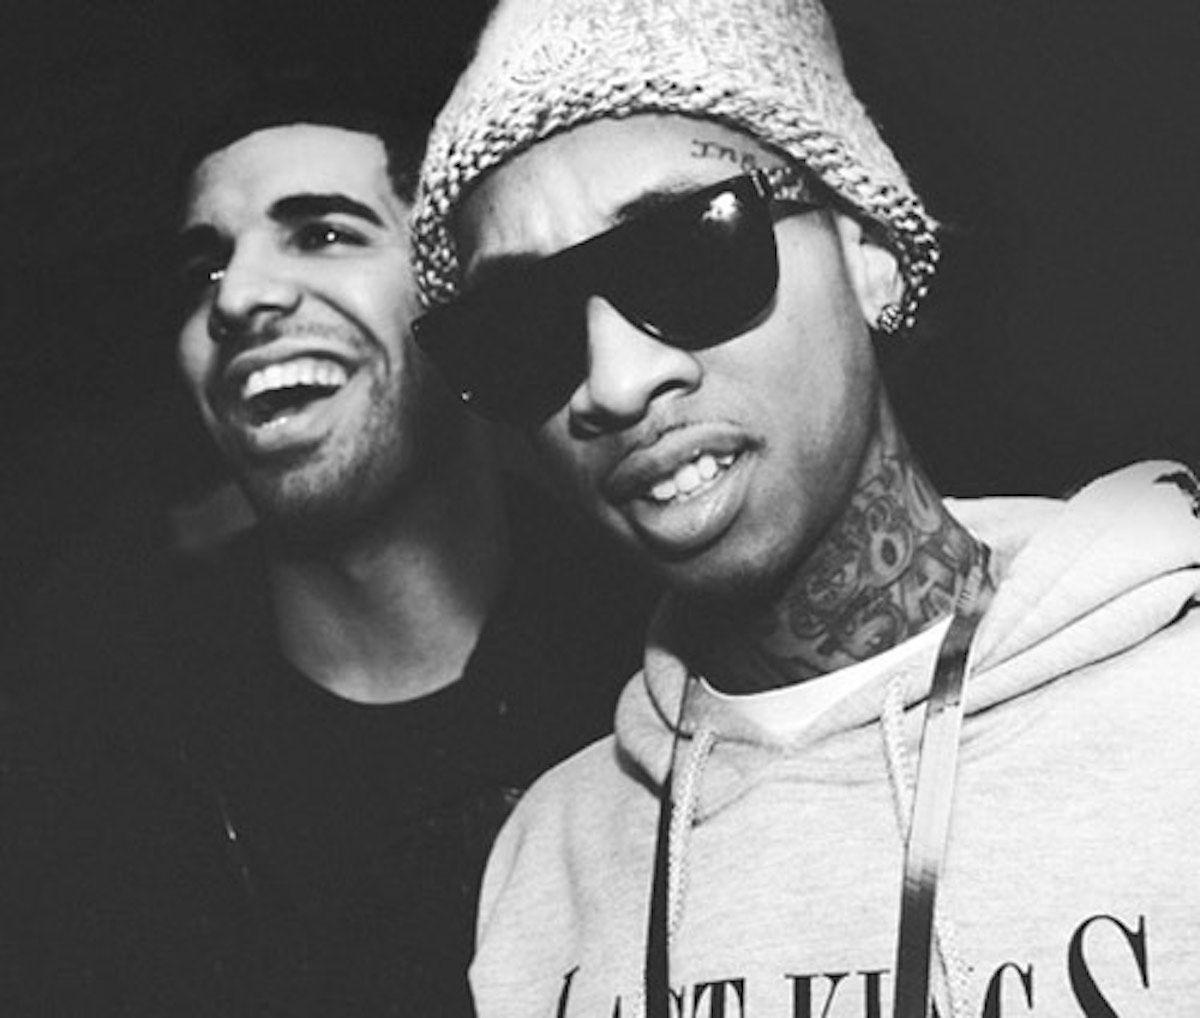 Tyga: “I Don't Like Drake As A Person. He's Just Fake To Me”